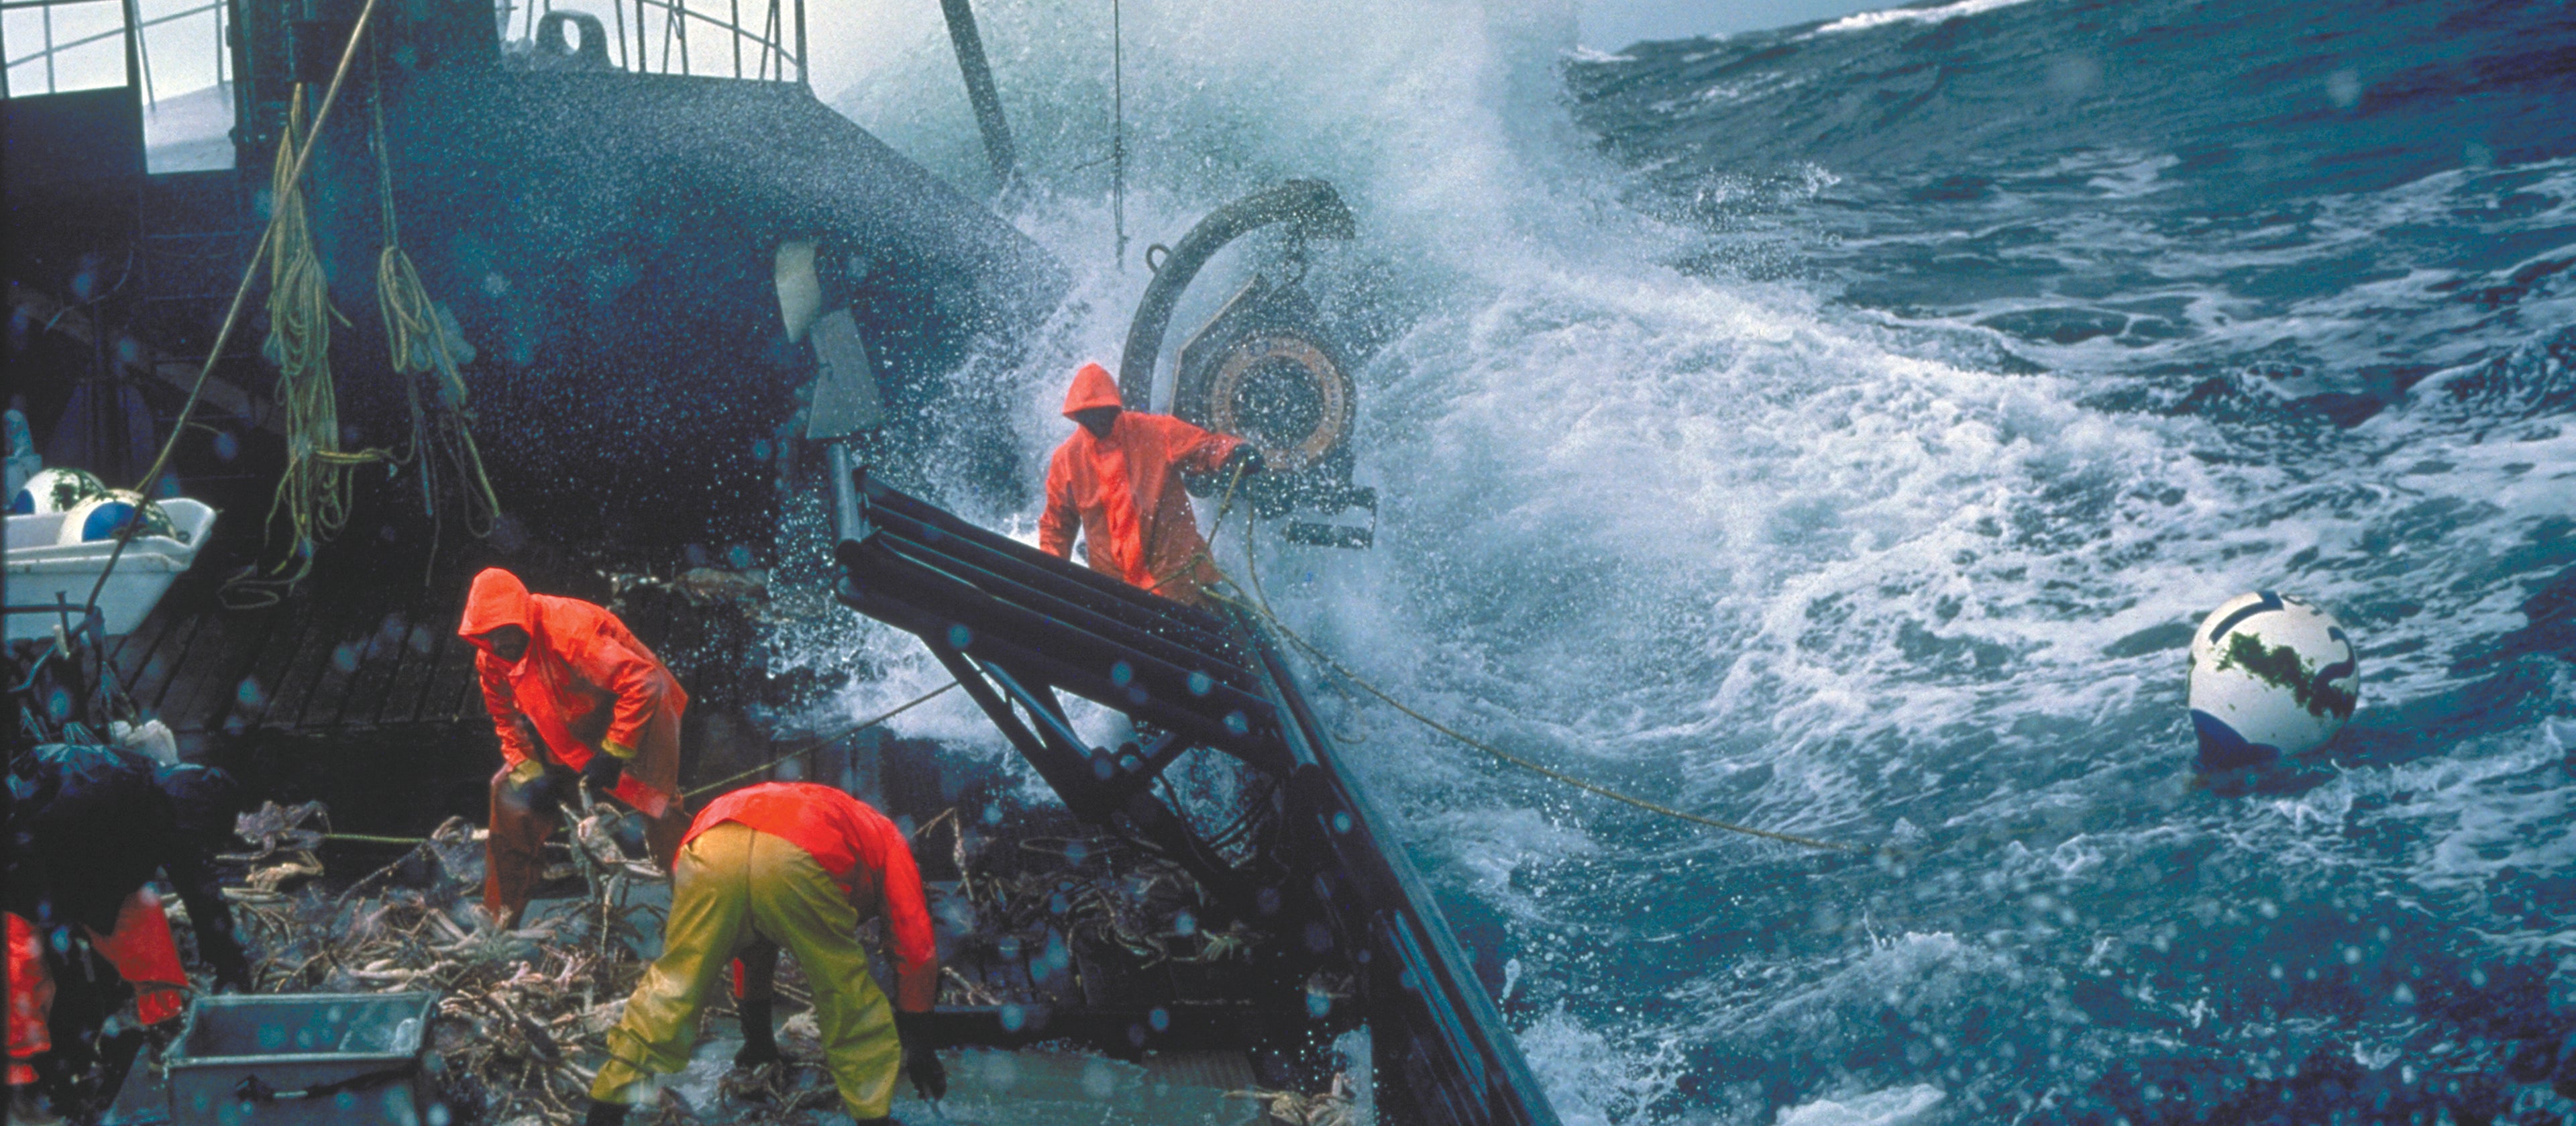 Crab fisherman working on deck in a storm